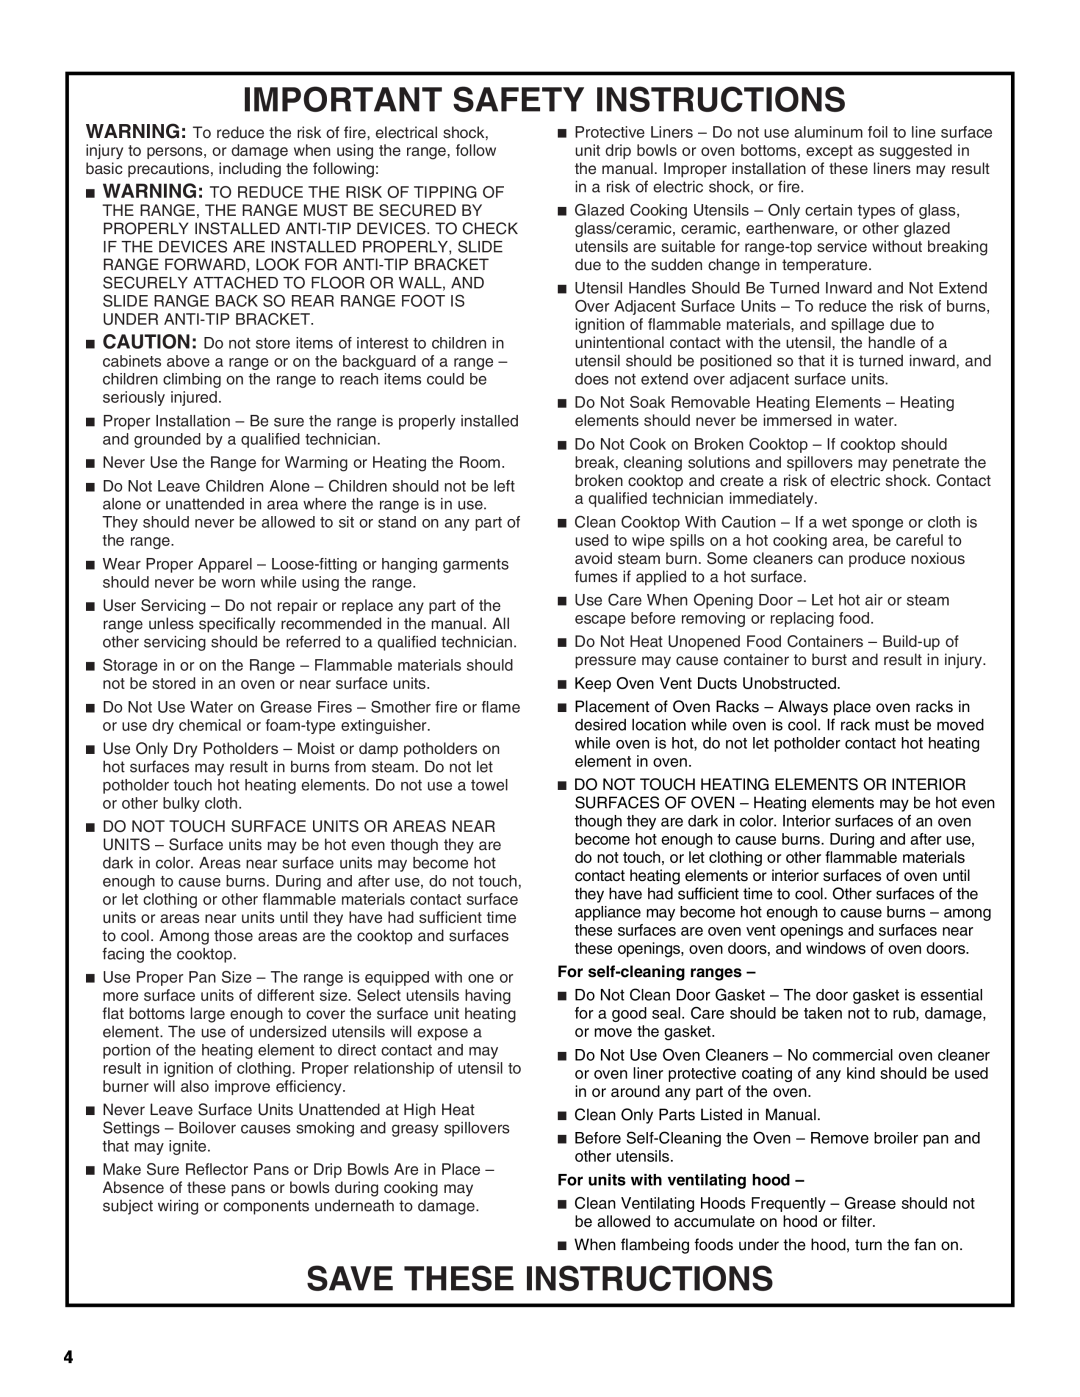 Whirlpool RF301OXT manual Important Safety Instructions, Save These Instructions, For self-cleaning ranges 